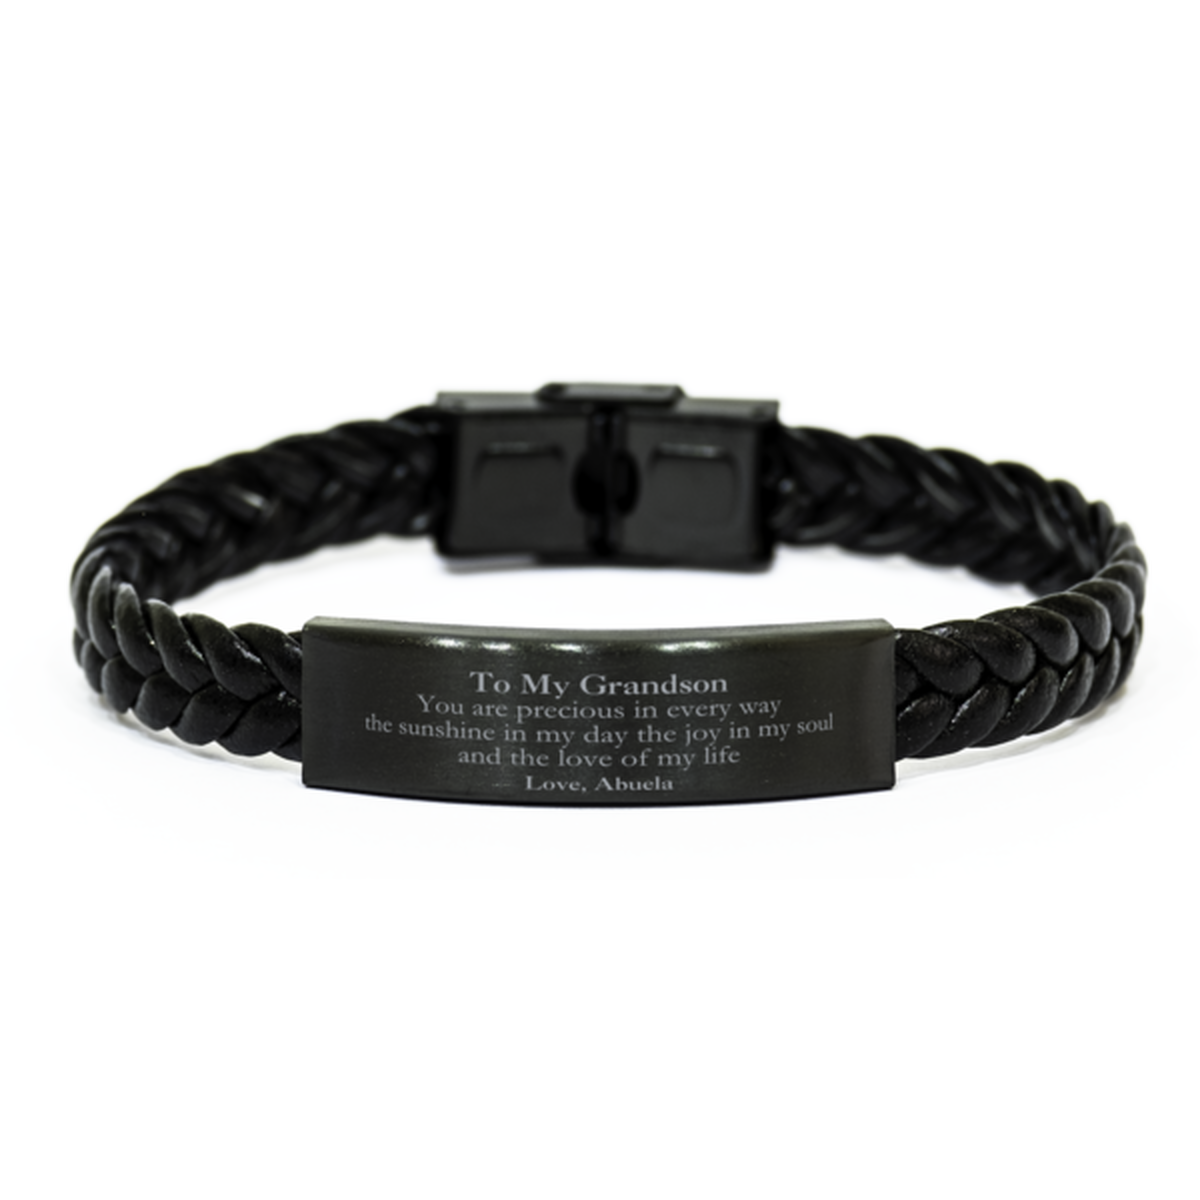 Graduation Gifts for Grandson Braided Leather Bracelet Present from Abuela, Christmas Grandson Birthday Gifts Grandson You are precious in every way the sunshine in my day. Love, Abuela